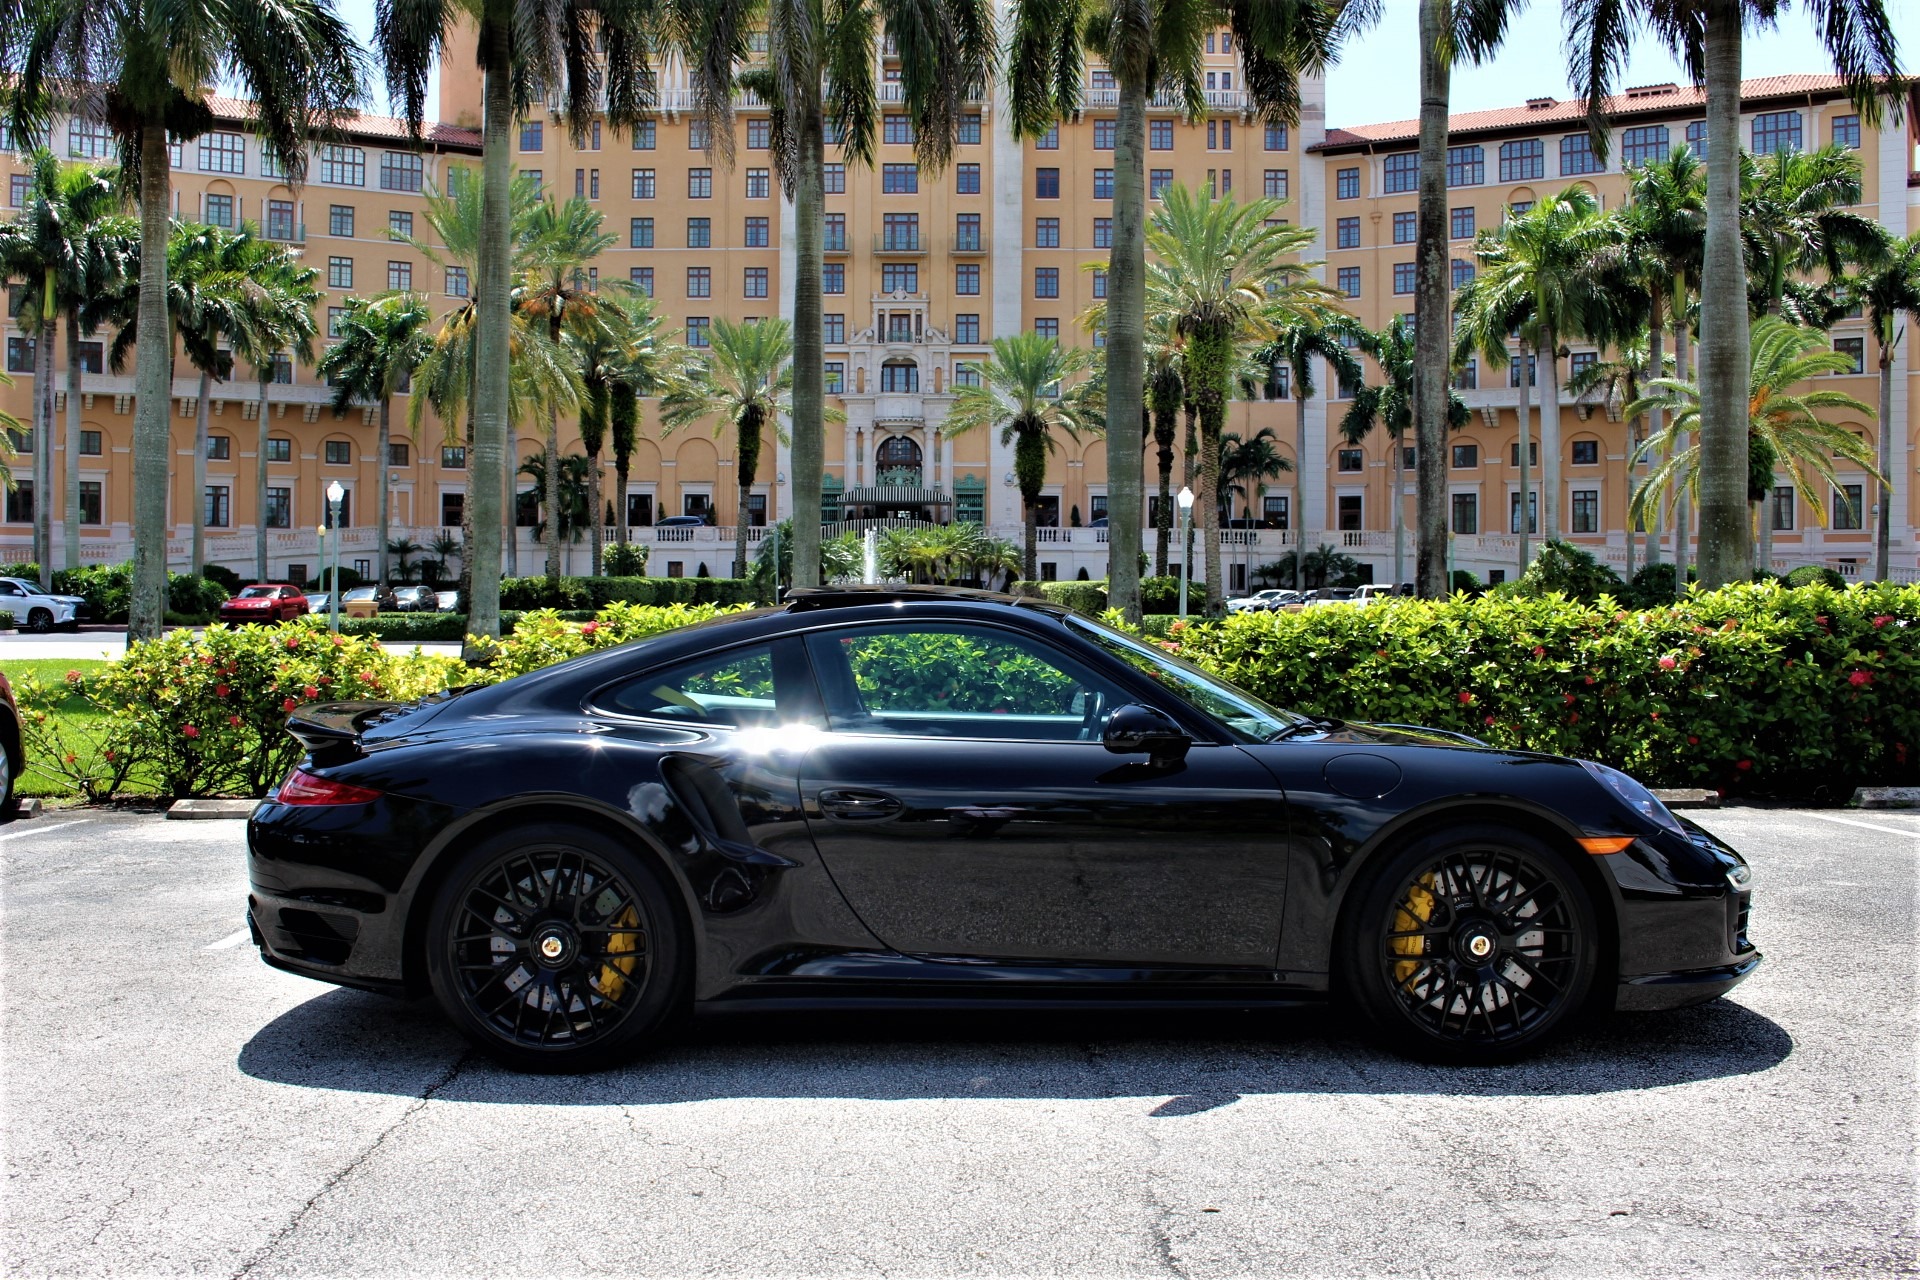 Used 2014 Porsche 911 Turbo S for sale Sold at The Gables Sports Cars in Miami FL 33146 3